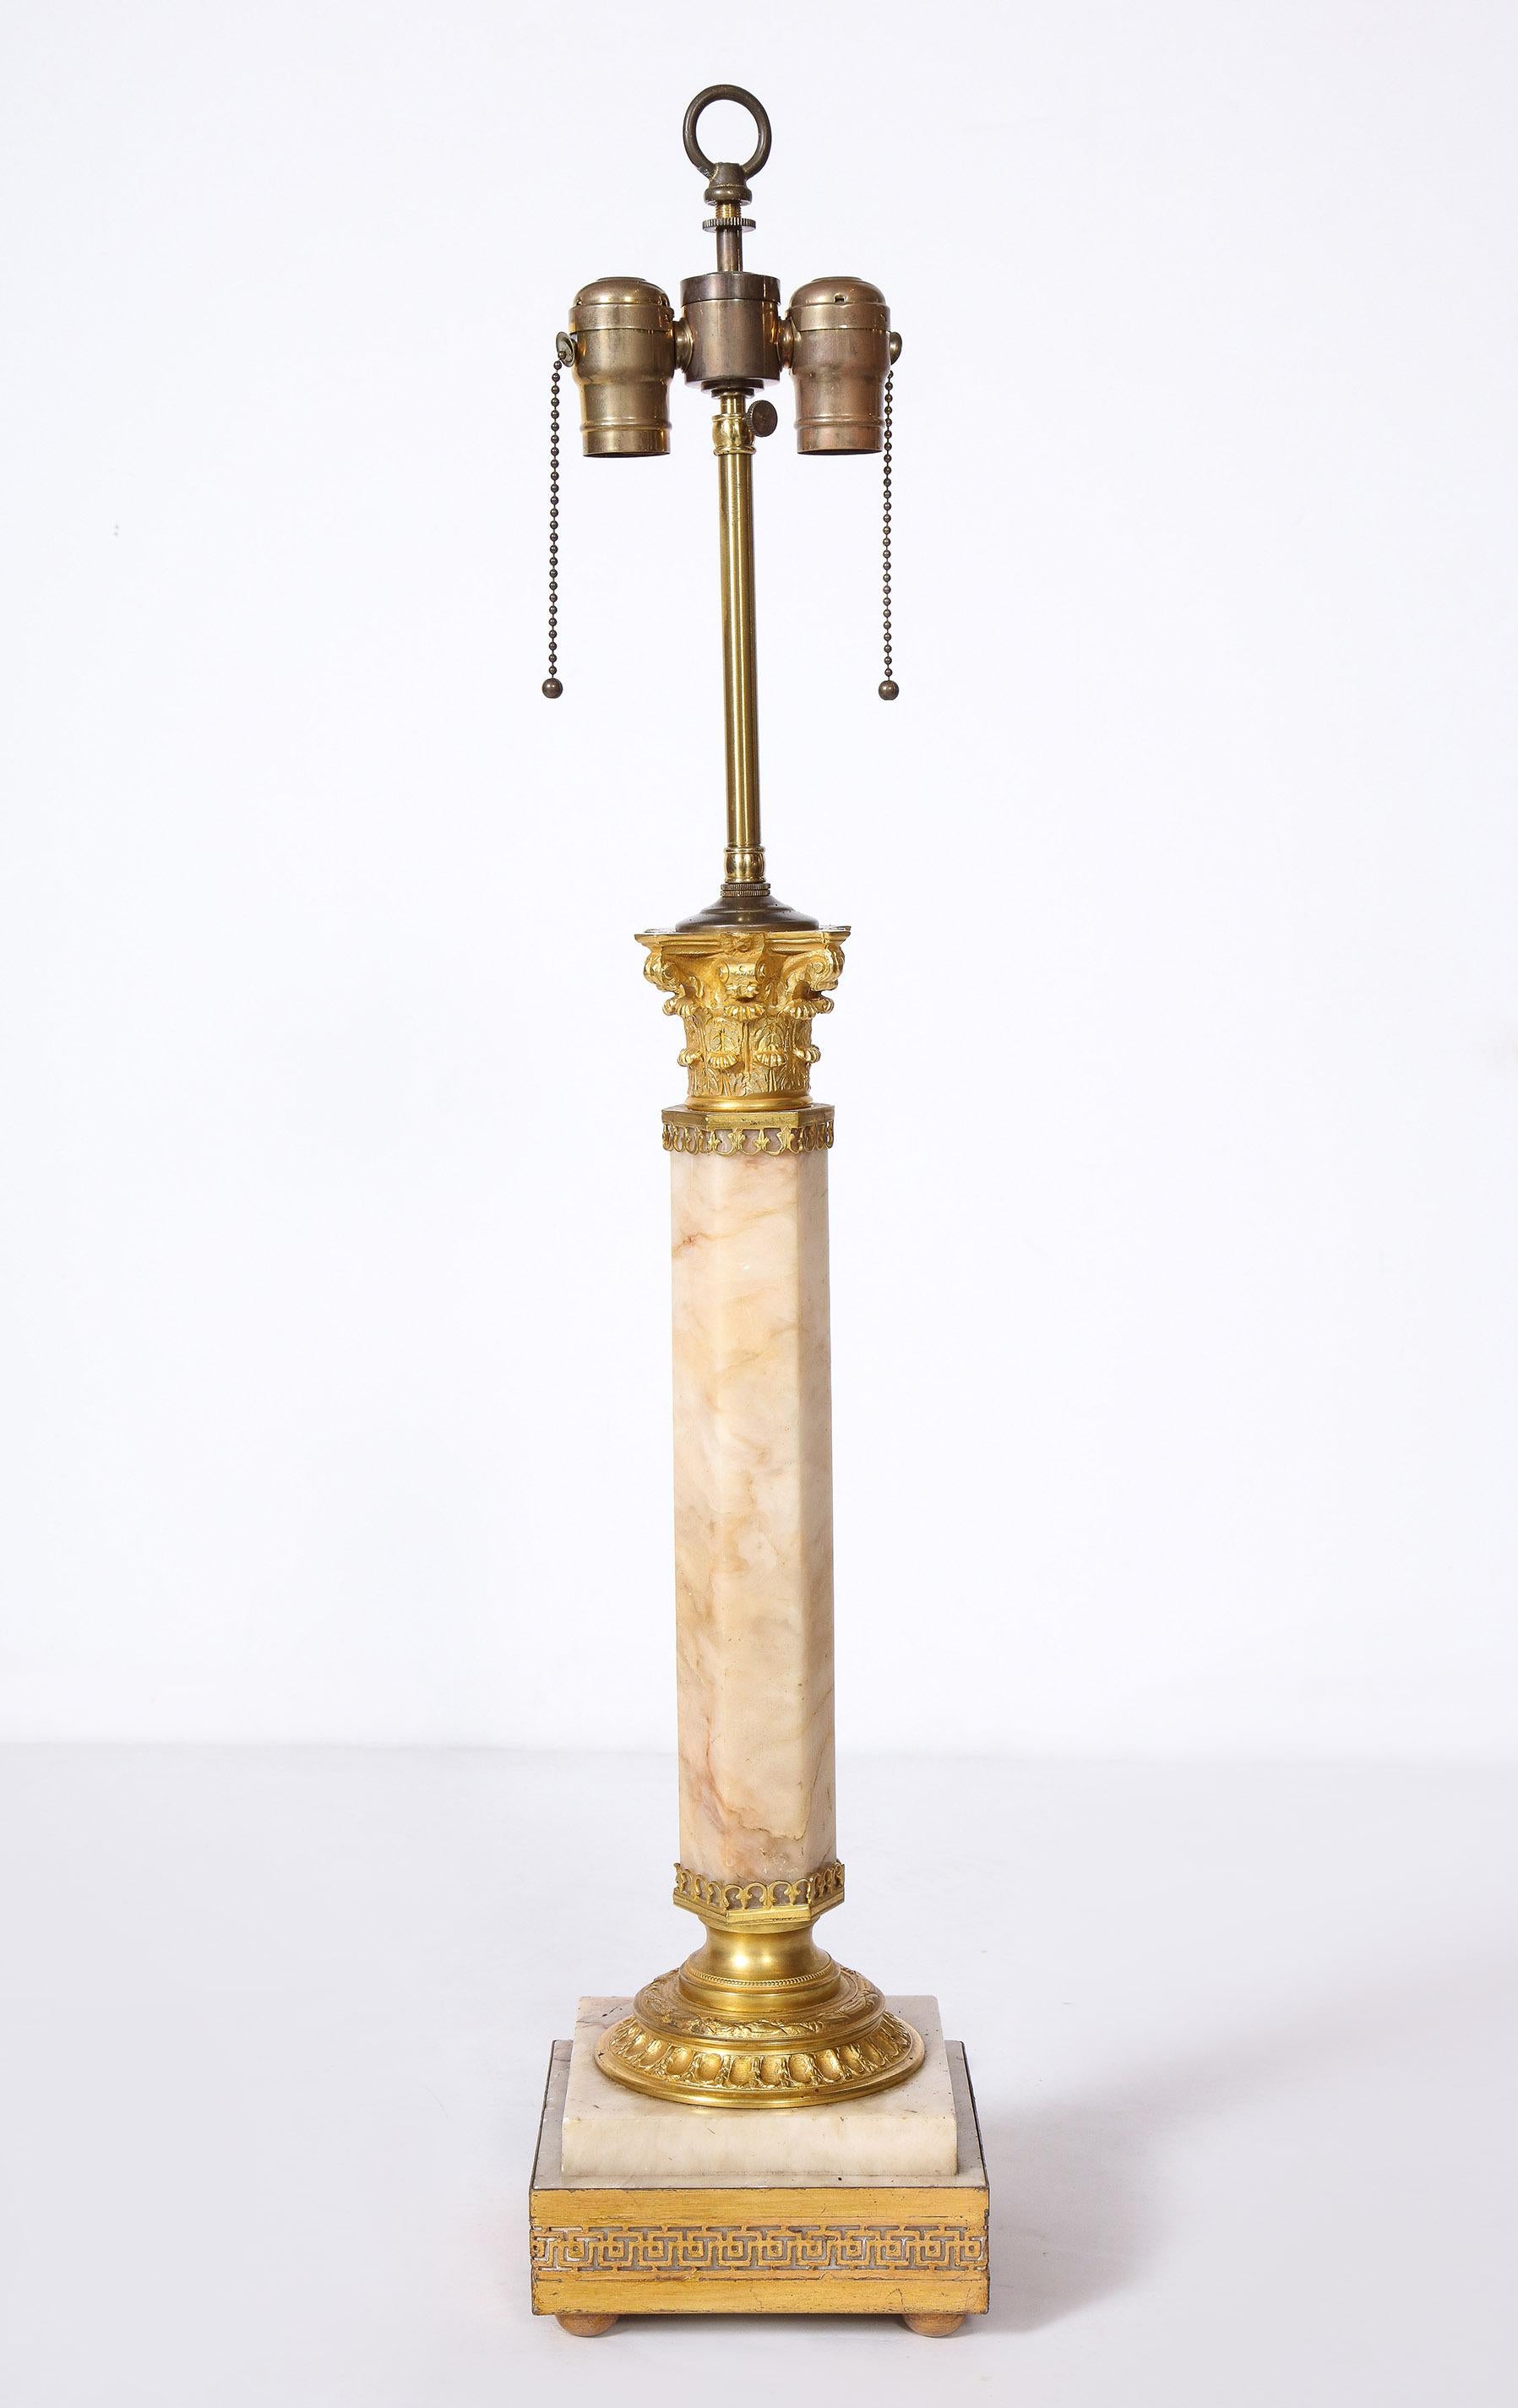 French bronze mounted marble column lamp

The octagonal column with superb quality bronze mounts on a stepped plinth with a Greek Key embossed bronze mount.